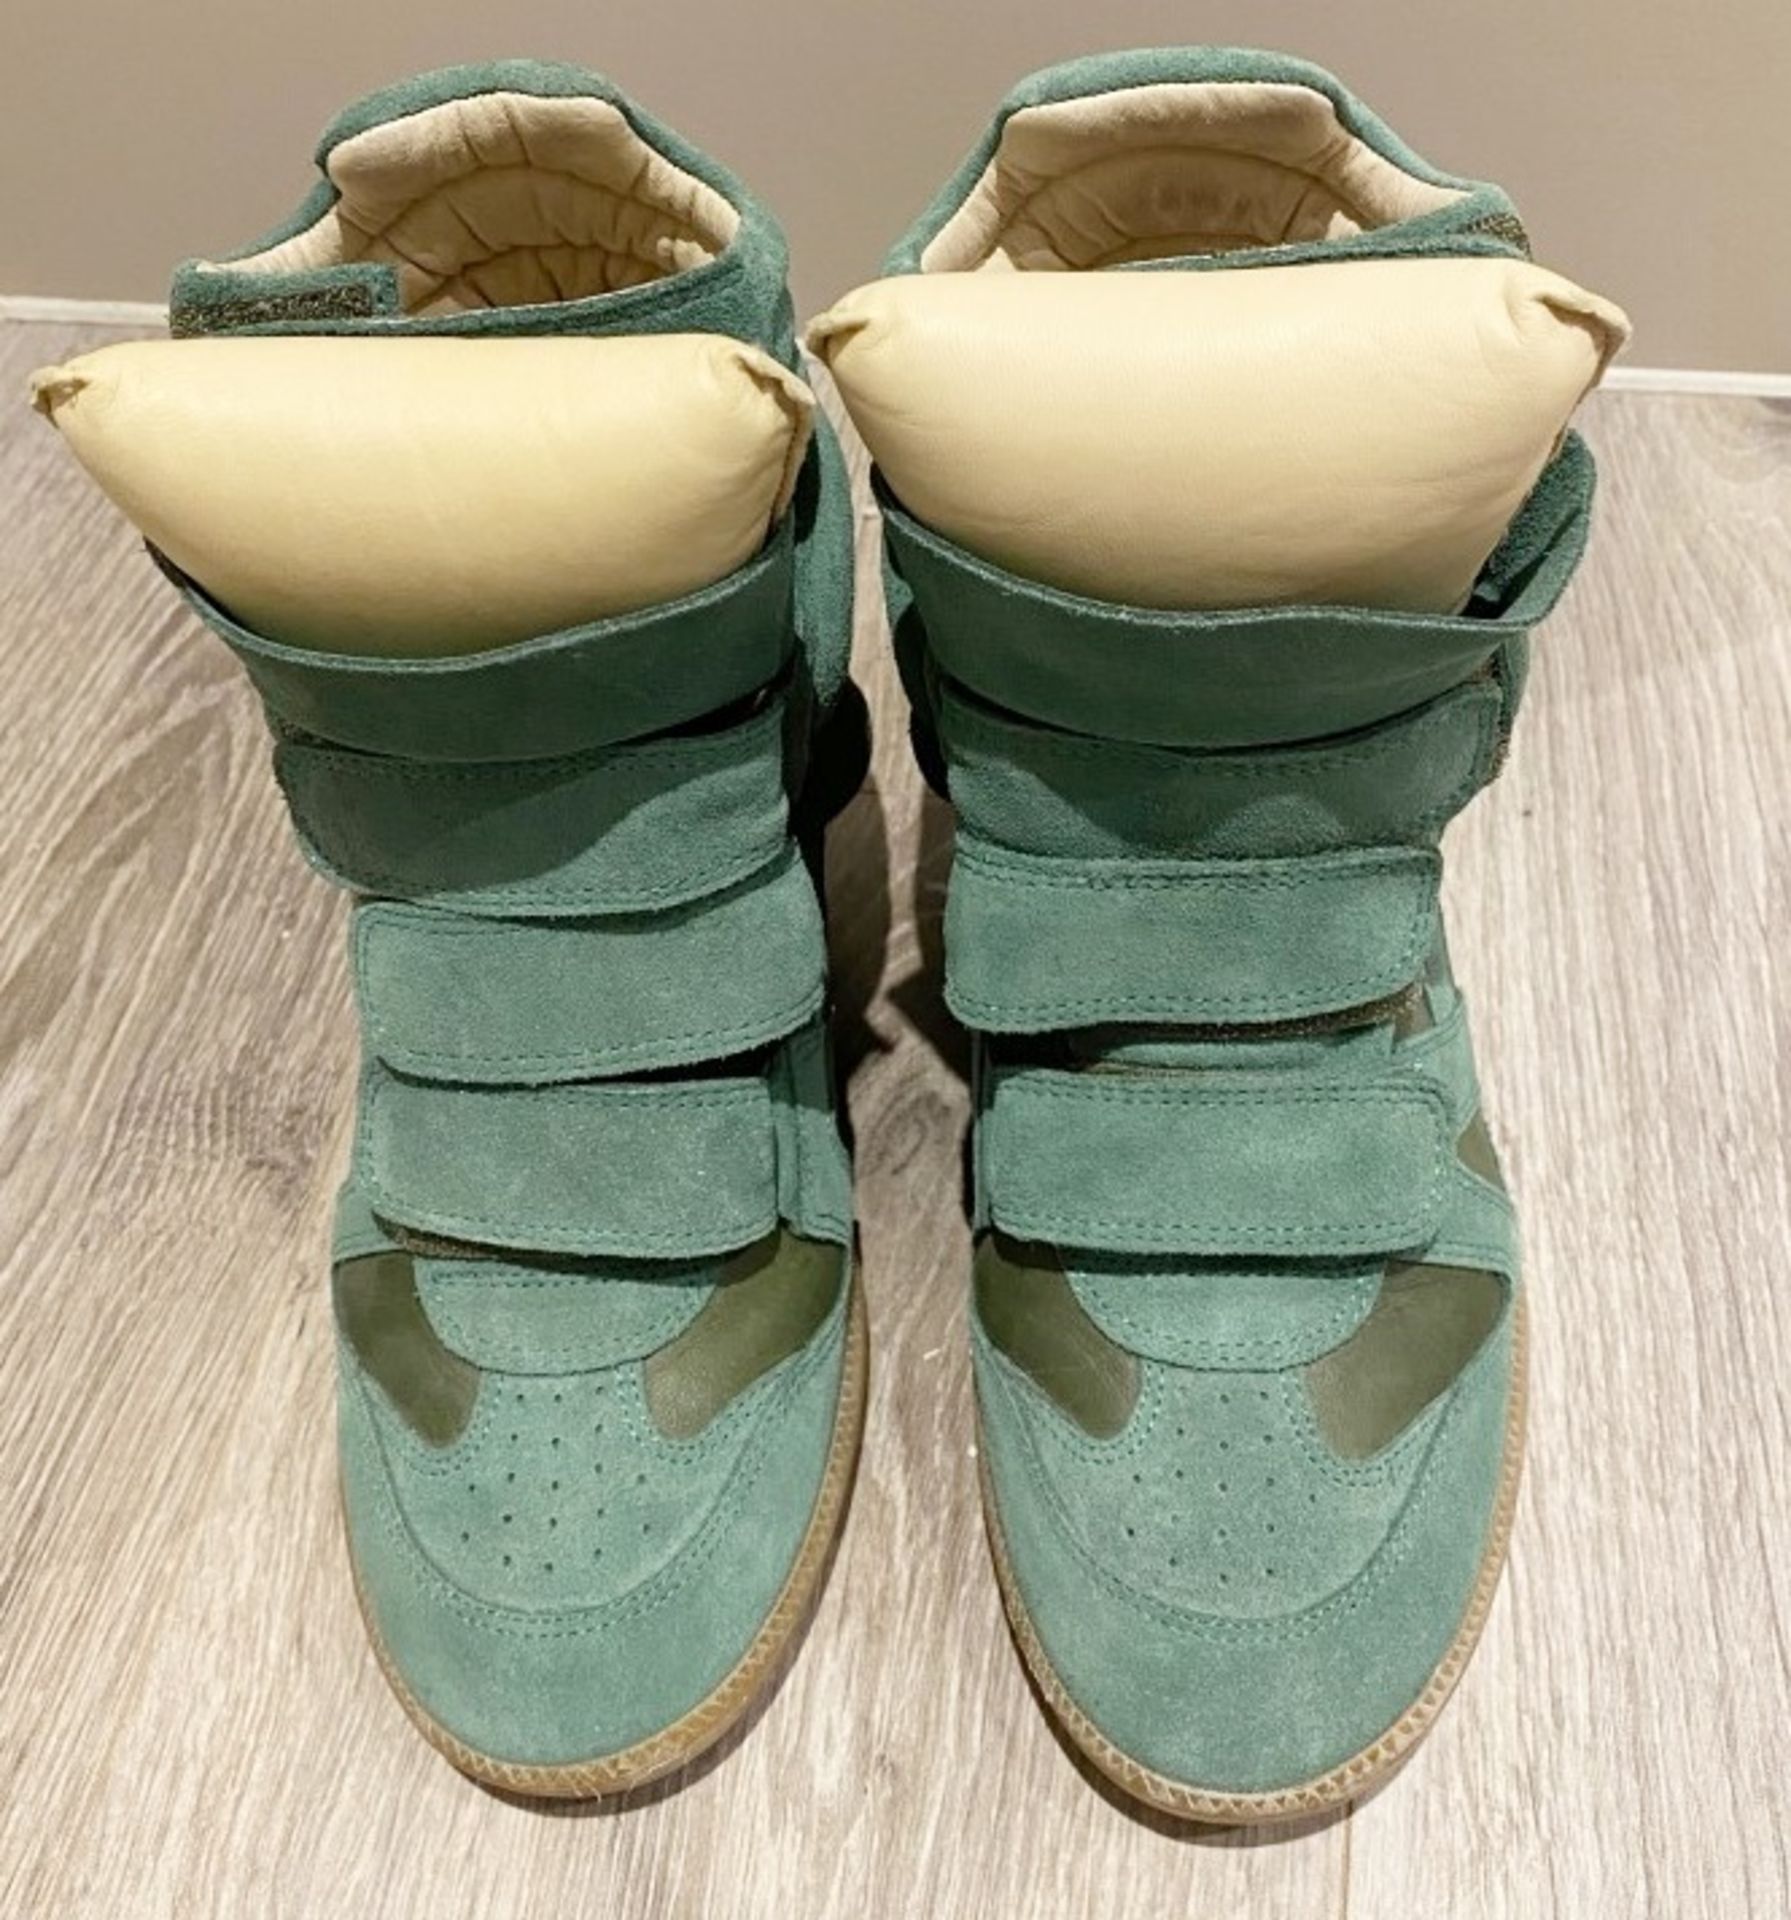 1 x Pair Of Genuine Isabel Marant Boots In Green - Size: 36 - Preowned in Good Condition - Ref: LOT3 - Image 4 of 4